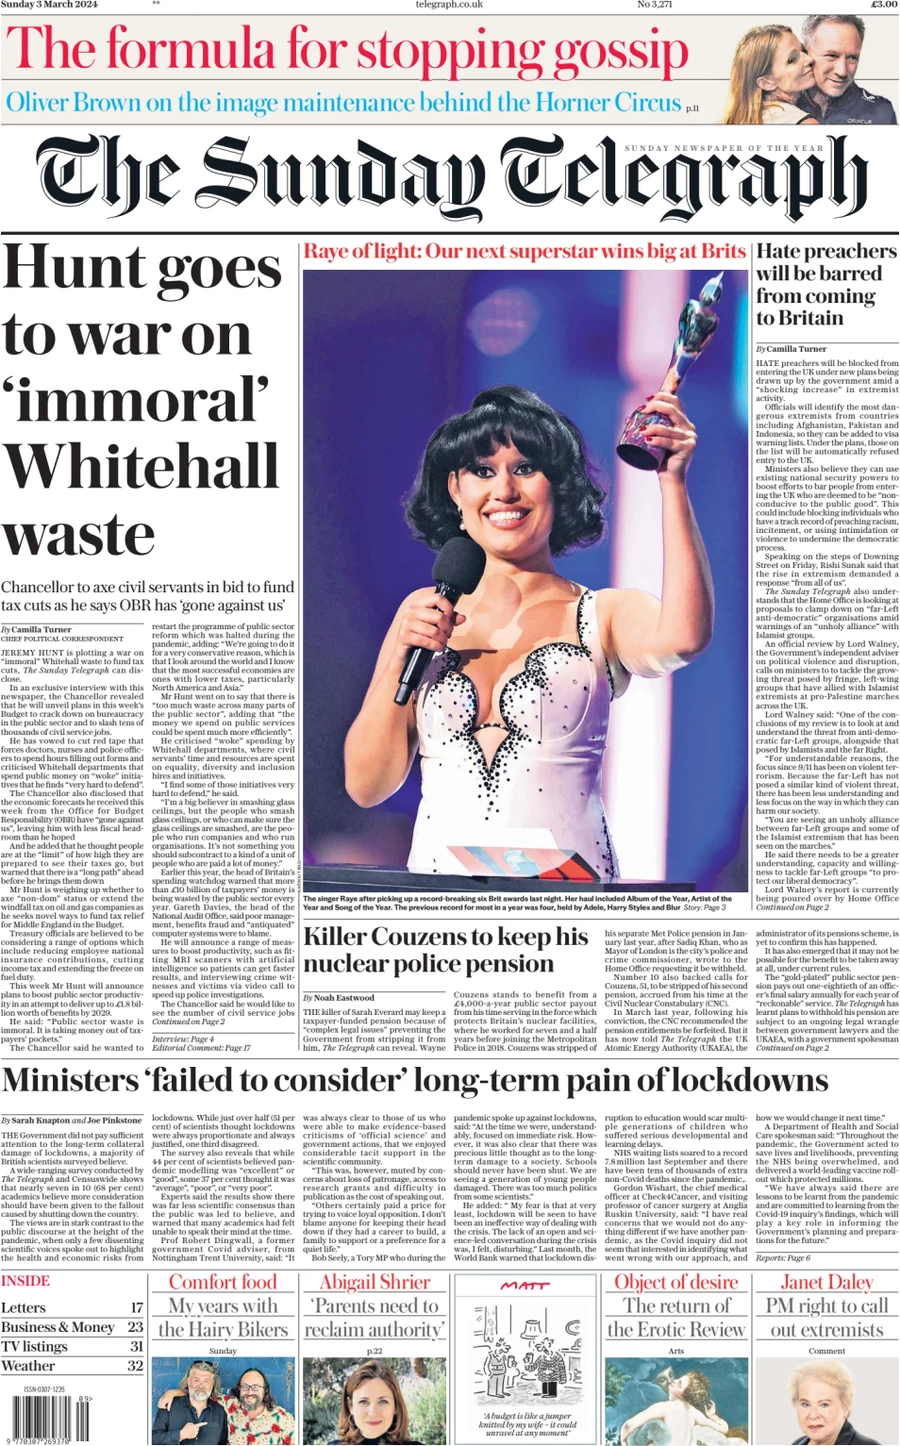 The Sunday Telegraph - Hunt goes to war on immoral Whitehall waste 